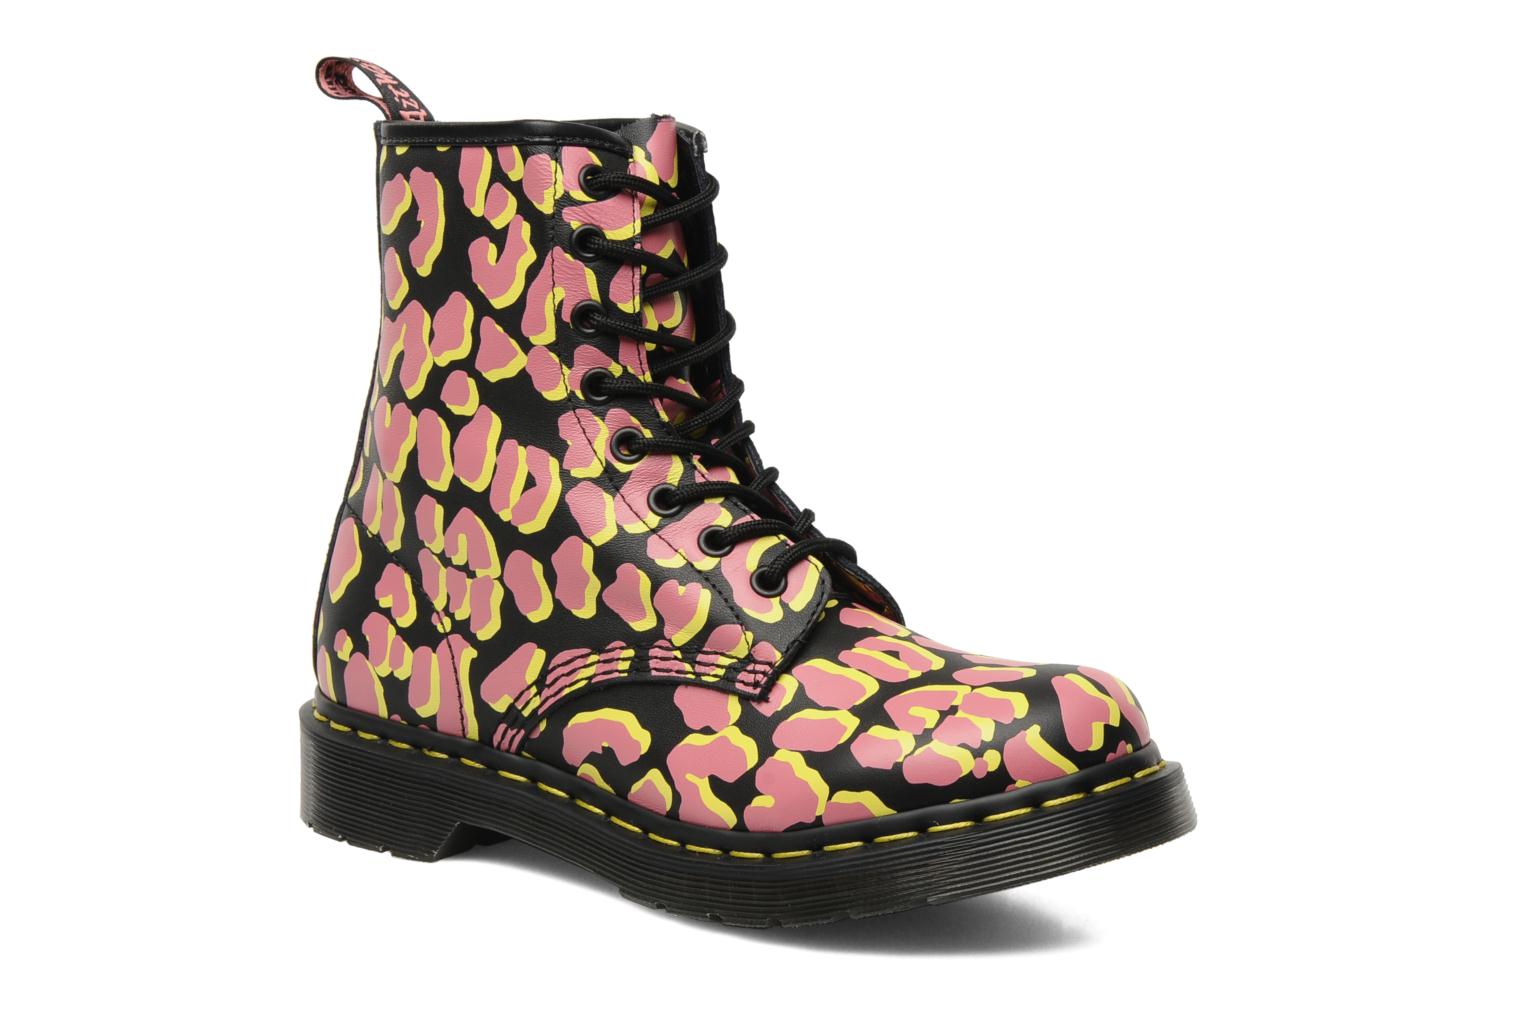 Foto Boots y Botines Dr. Martens 1460 W Leopard Mujer